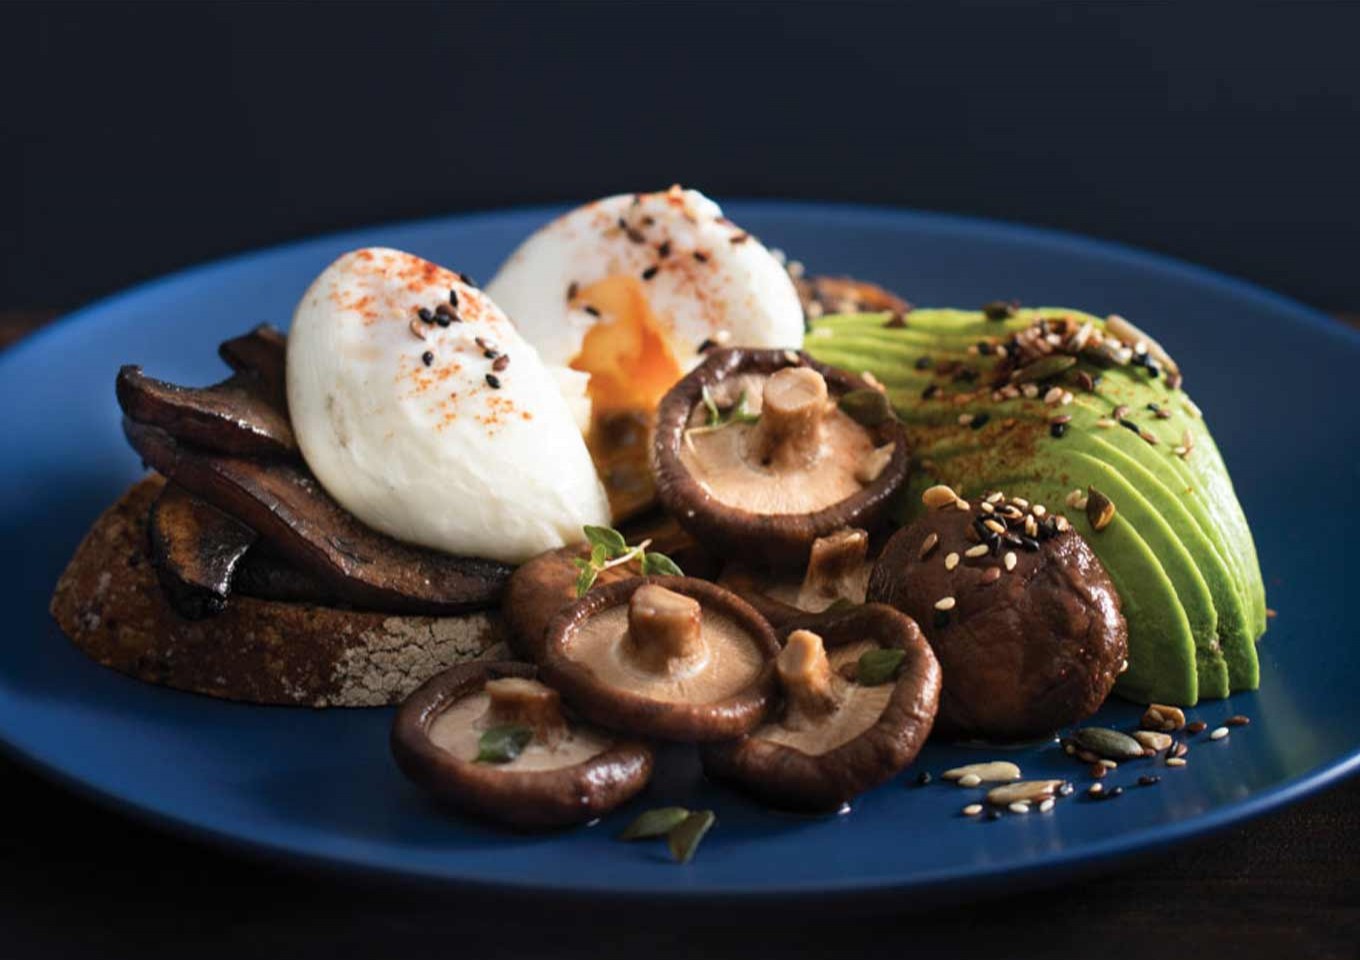 Mushrooms on toast with poached eggs, pickled shiitake and avocado